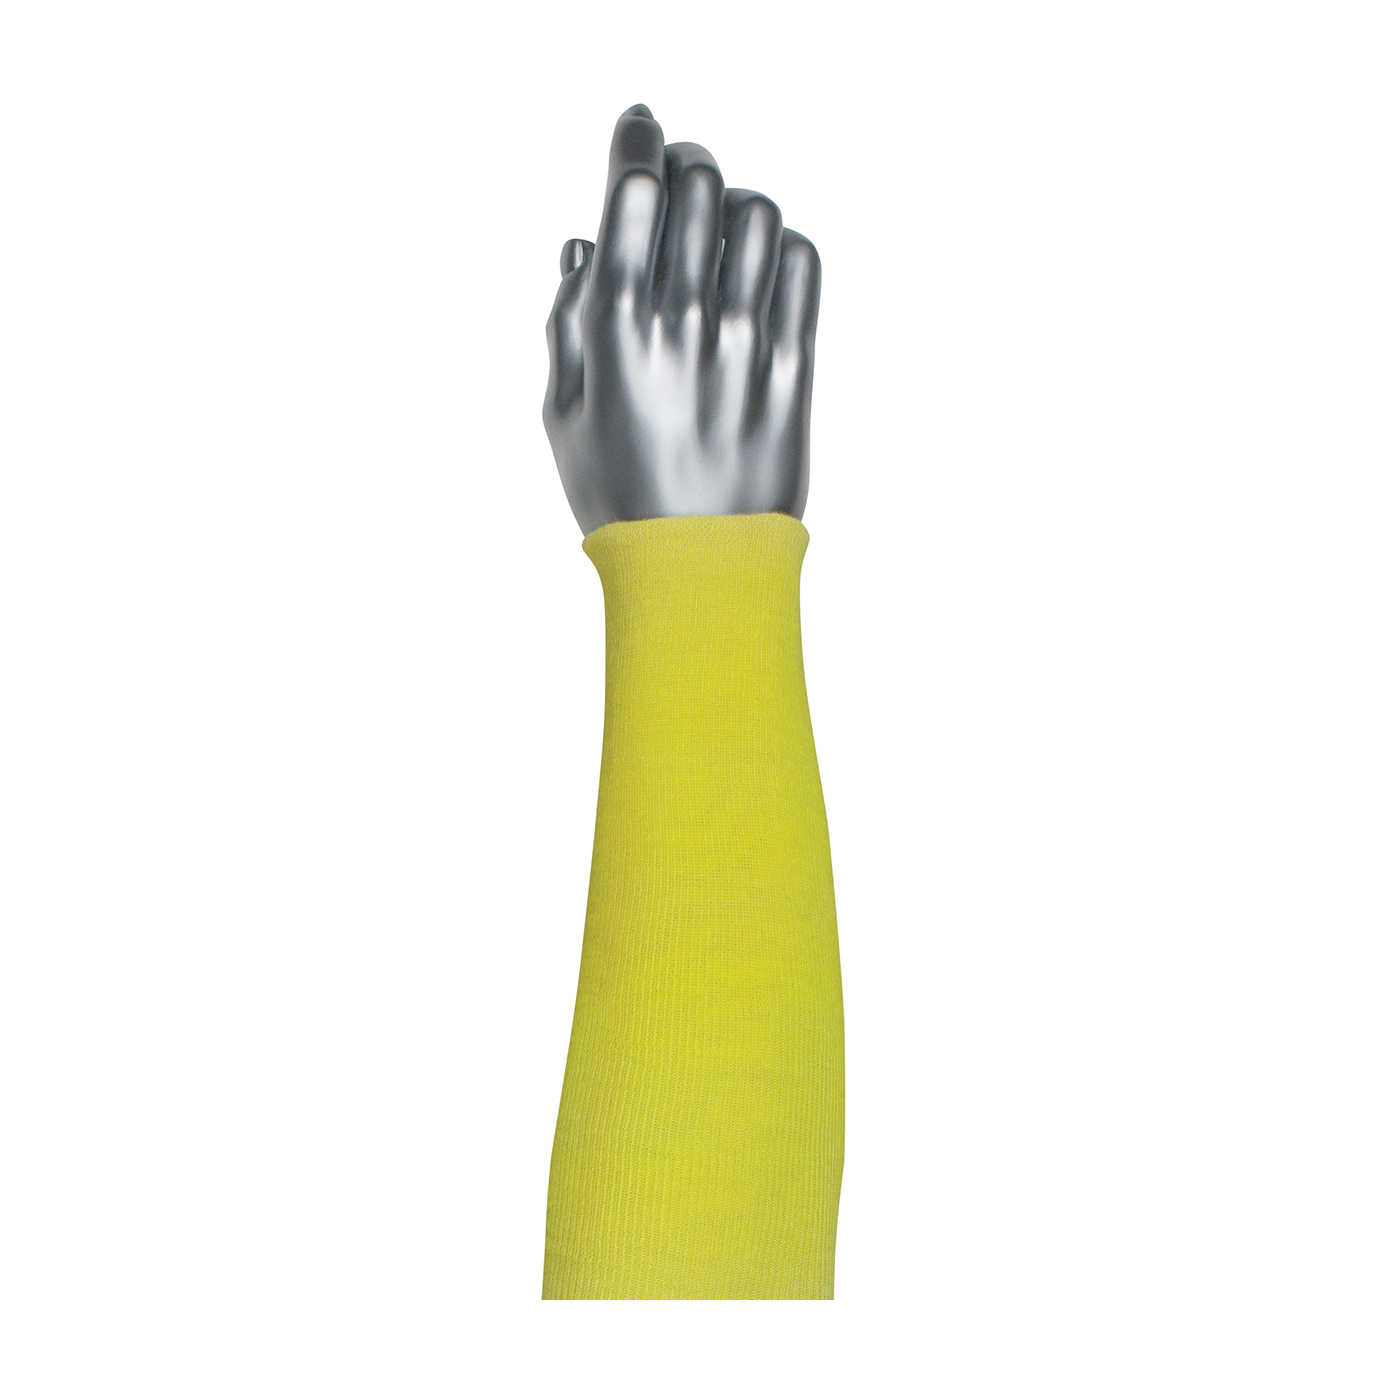 PIP® Kut Gard® 10-KS14CL 10-KSCL Cut-Resistant Sleeves, 3 in, 14 in L x 2 ply THK, Kevlar®/Cotton Inner Liner, Yellow